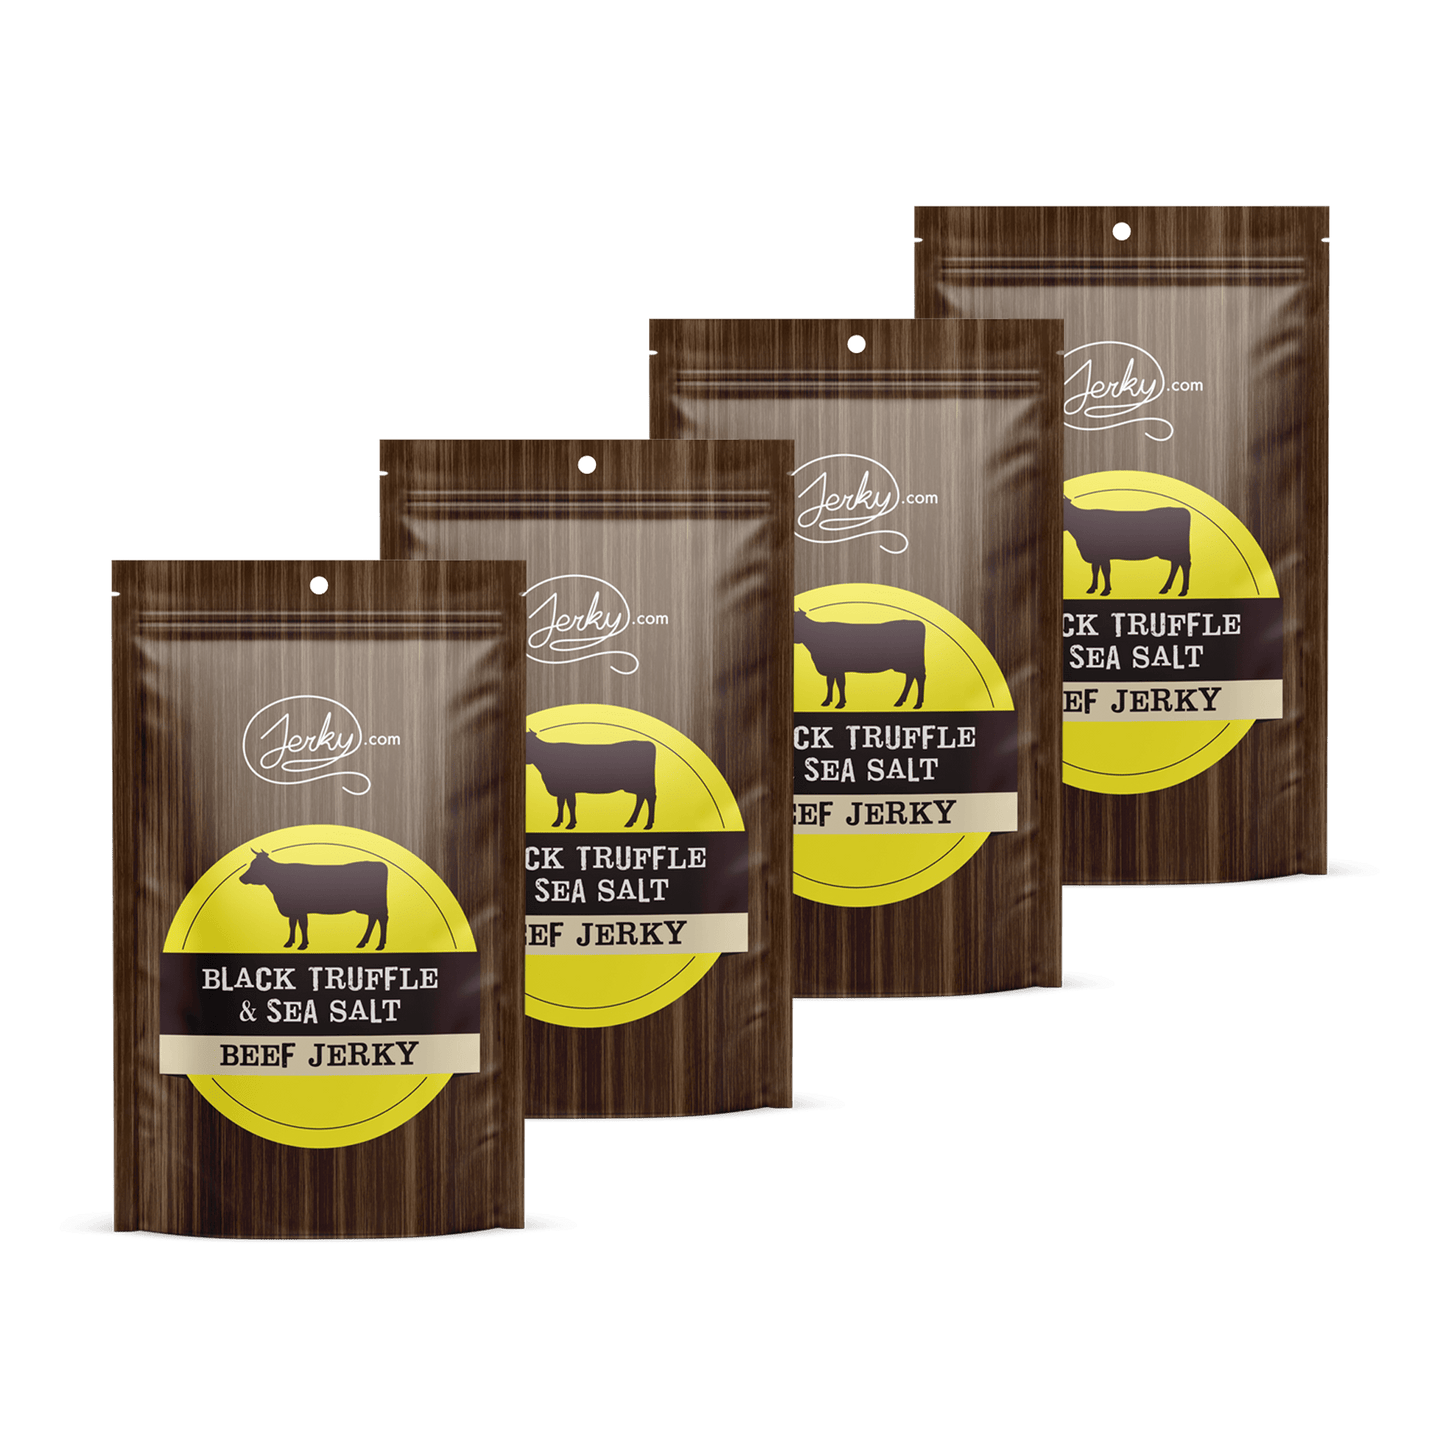 All-Natural Beef Jerky - Black Truffle and Sea Salt by Jerky.com